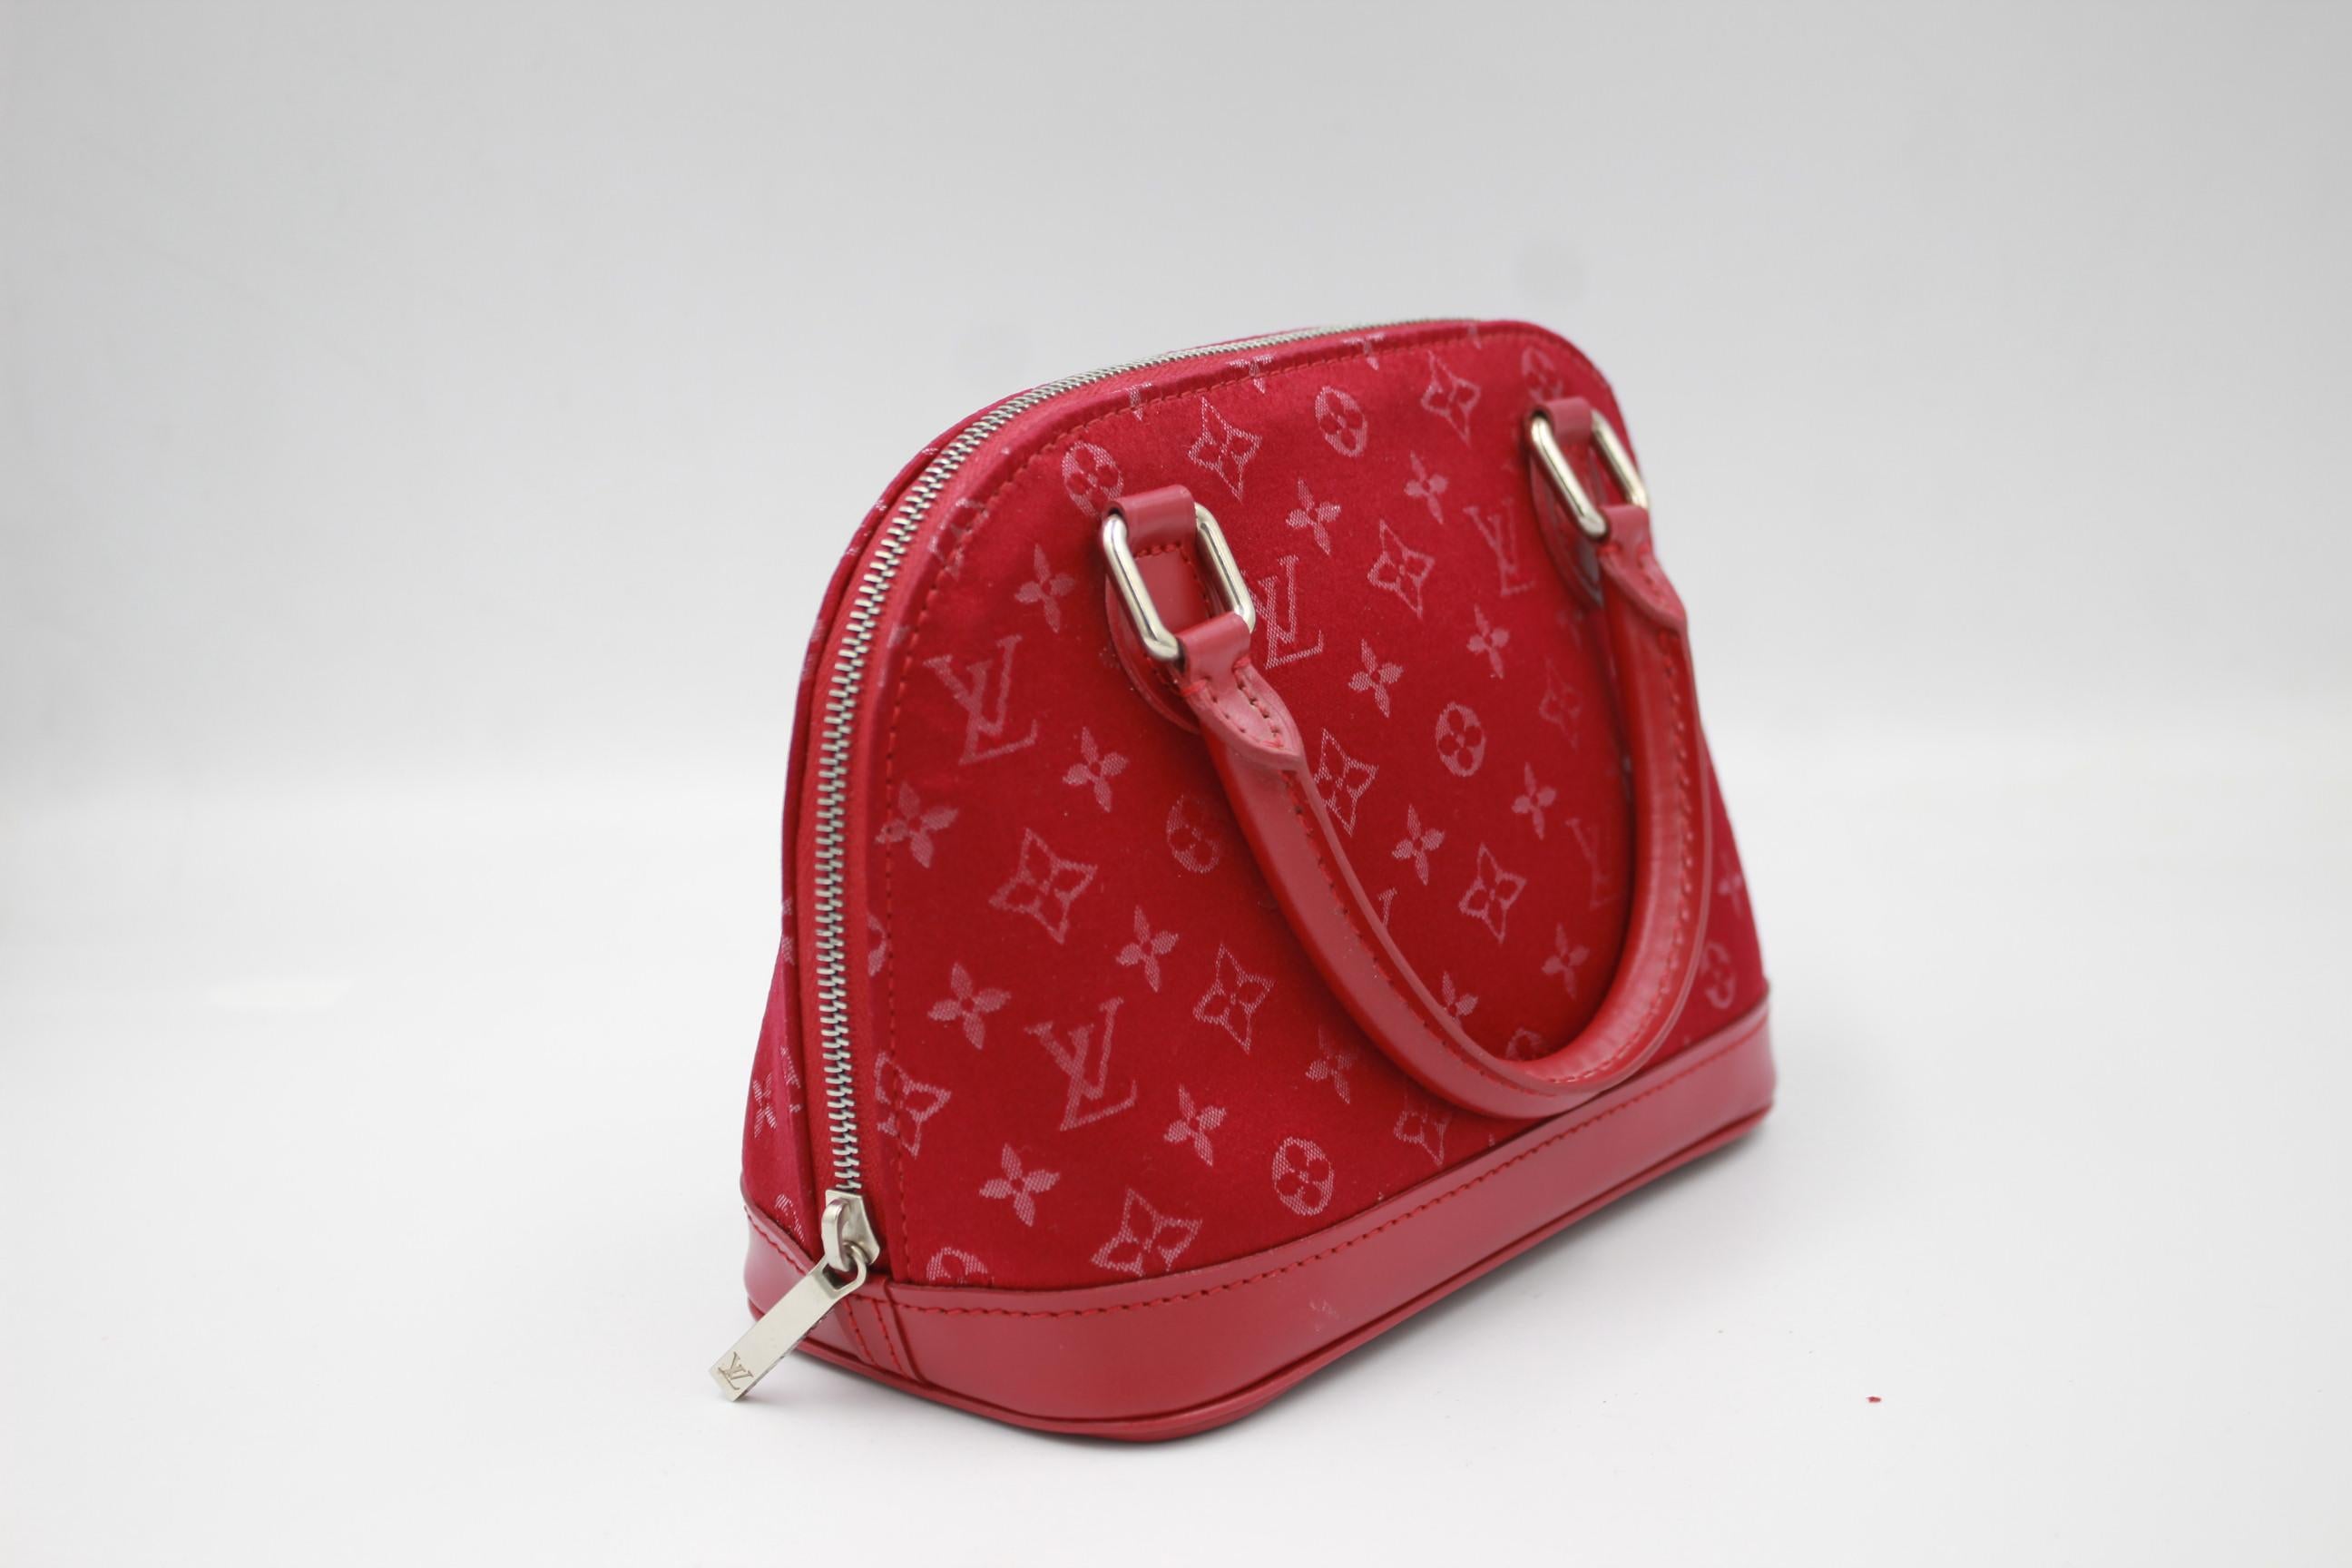 Louis Vuitton bébé Alma in red satin ( 2013 )
Red leather finishes.
Good conditions, some stains on the inside
15cm x 12cm x 7cm 
